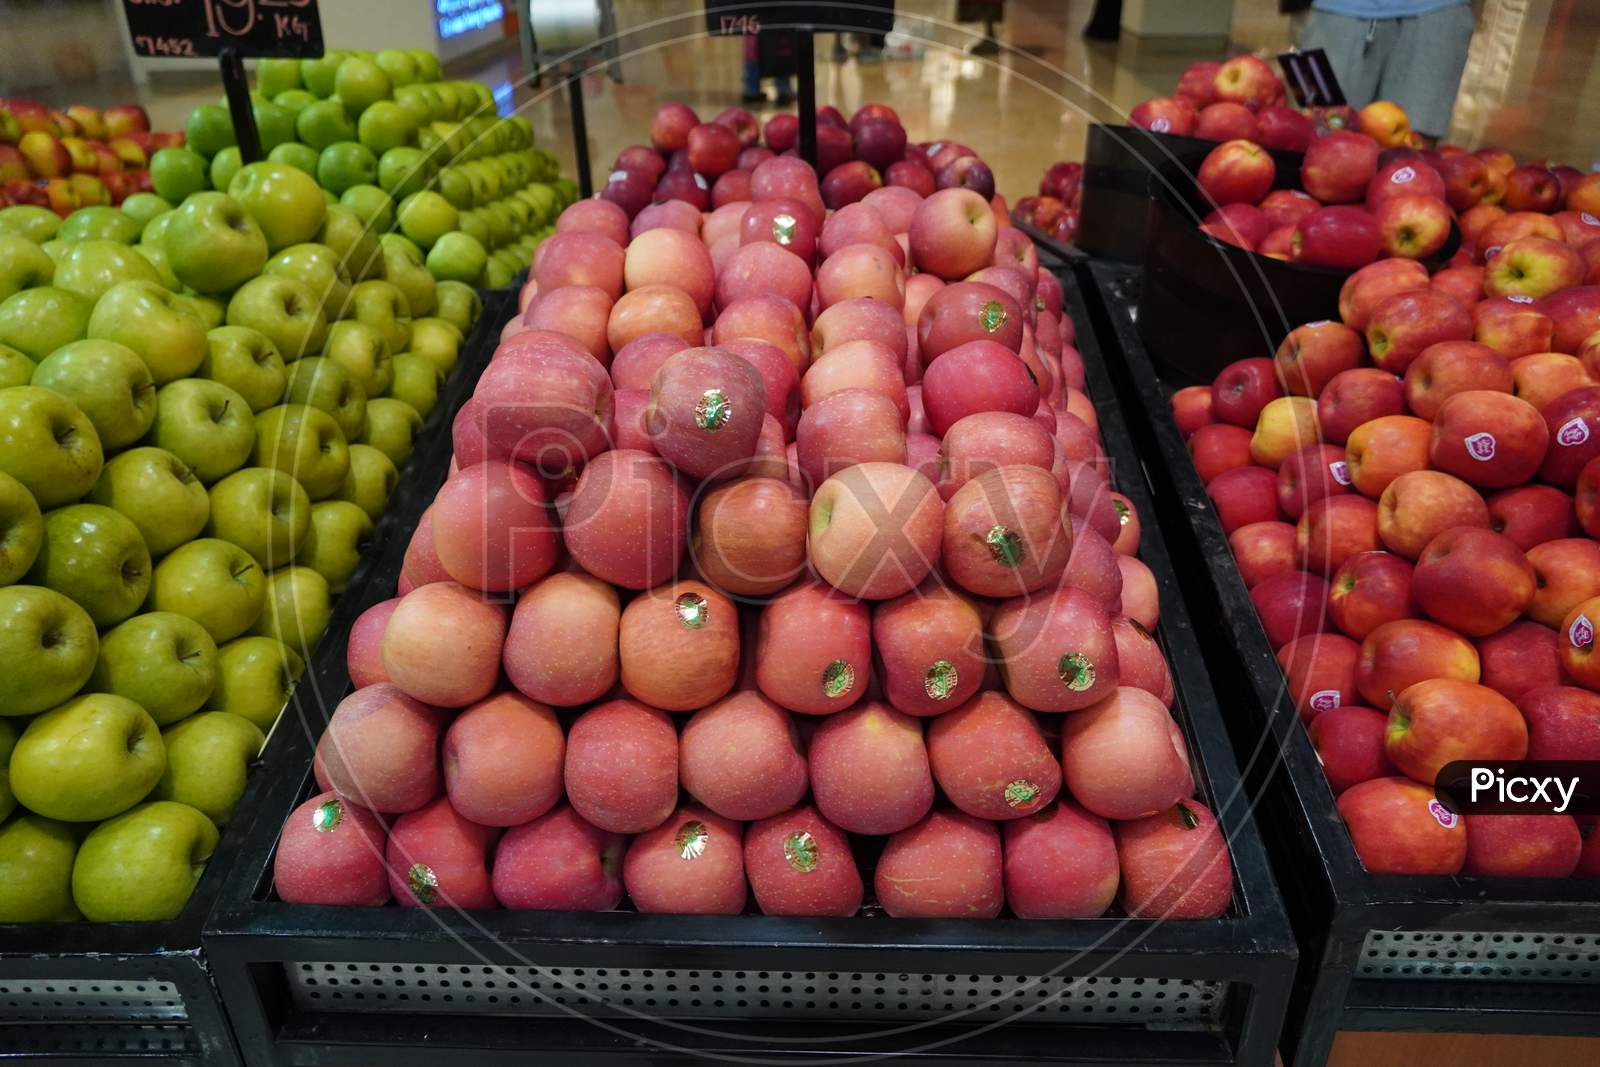 Bunch Of Red, Pink And Green Apples On Boxes In Supermarket. Apples Being Sold At Public Market. Organic Food Fresh Apples In Shop, Store - India